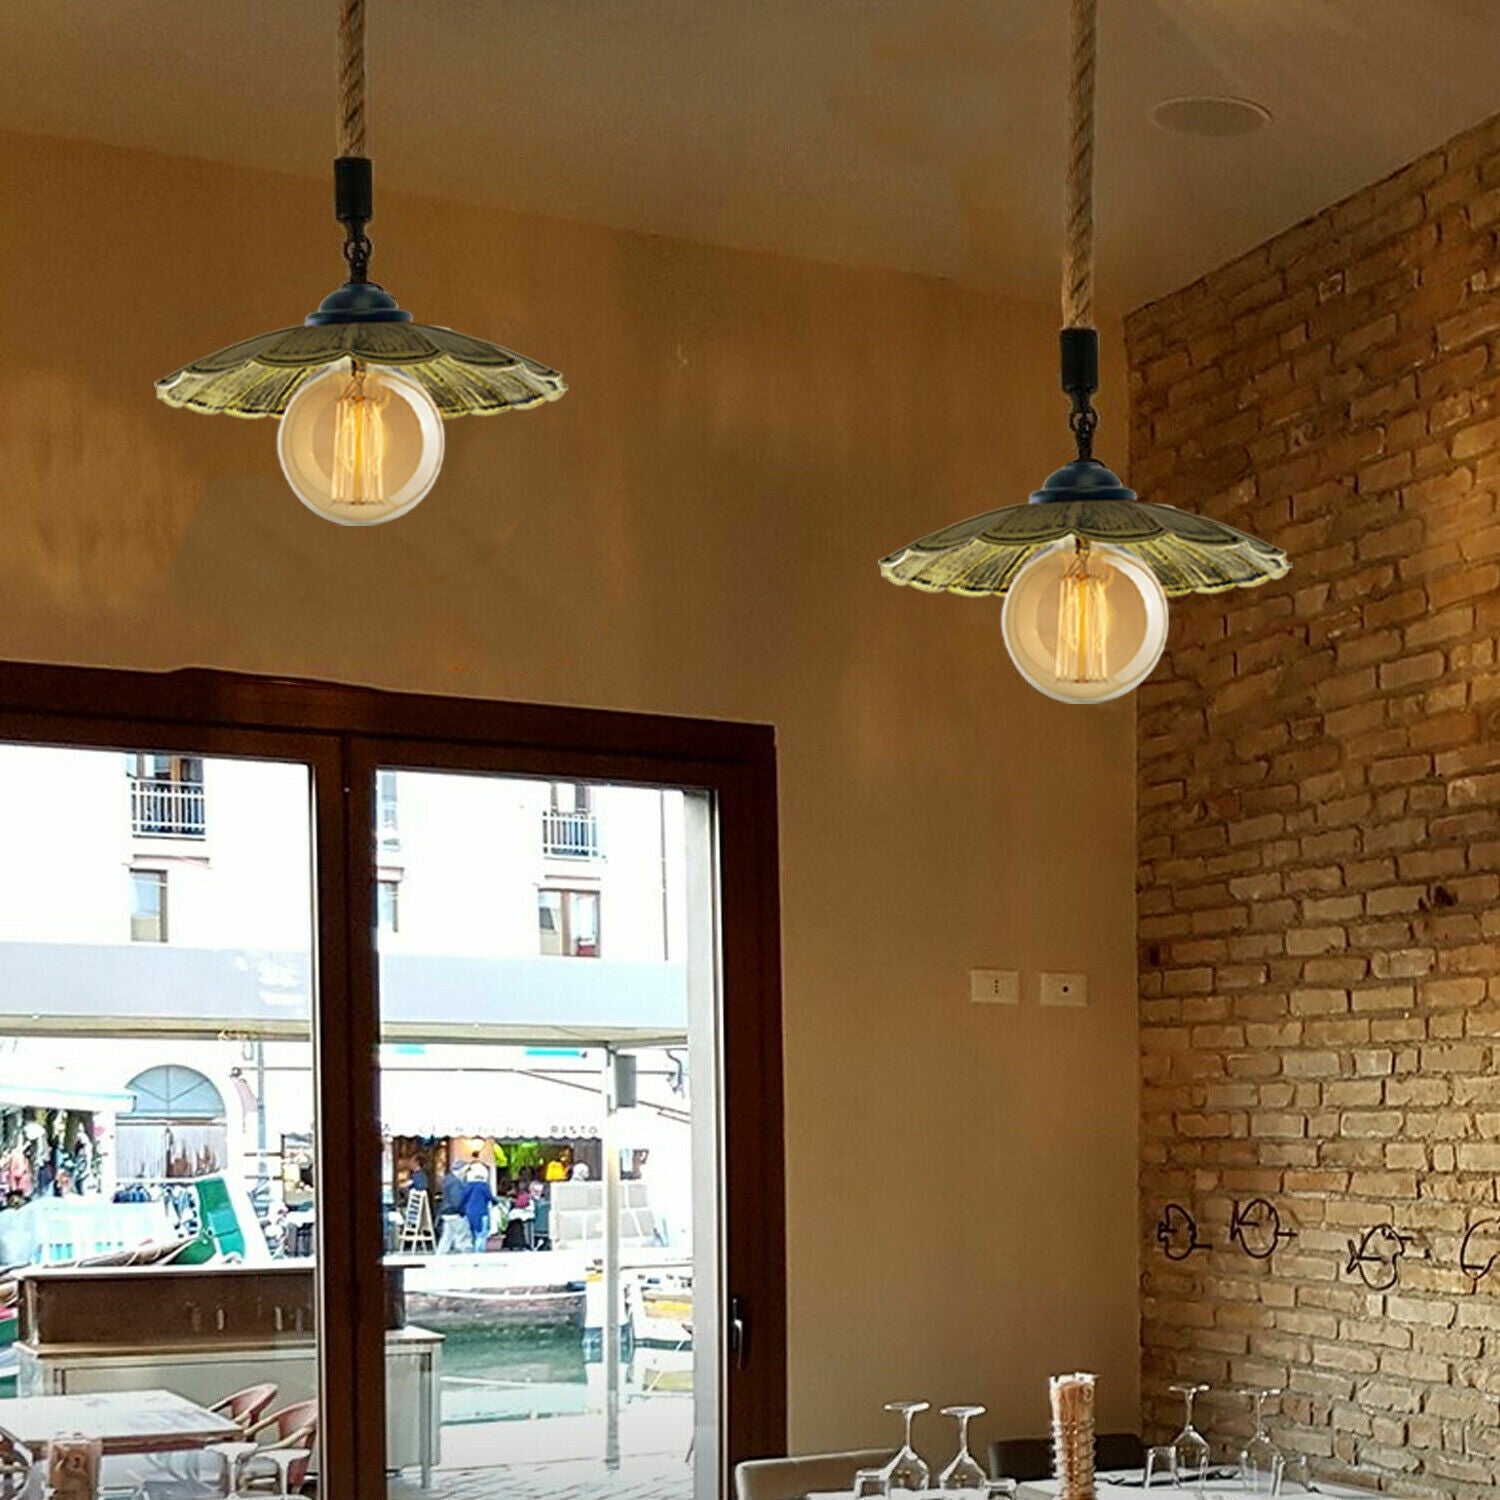 umbrella-shape Pendant Light with rope for cafe.JPG